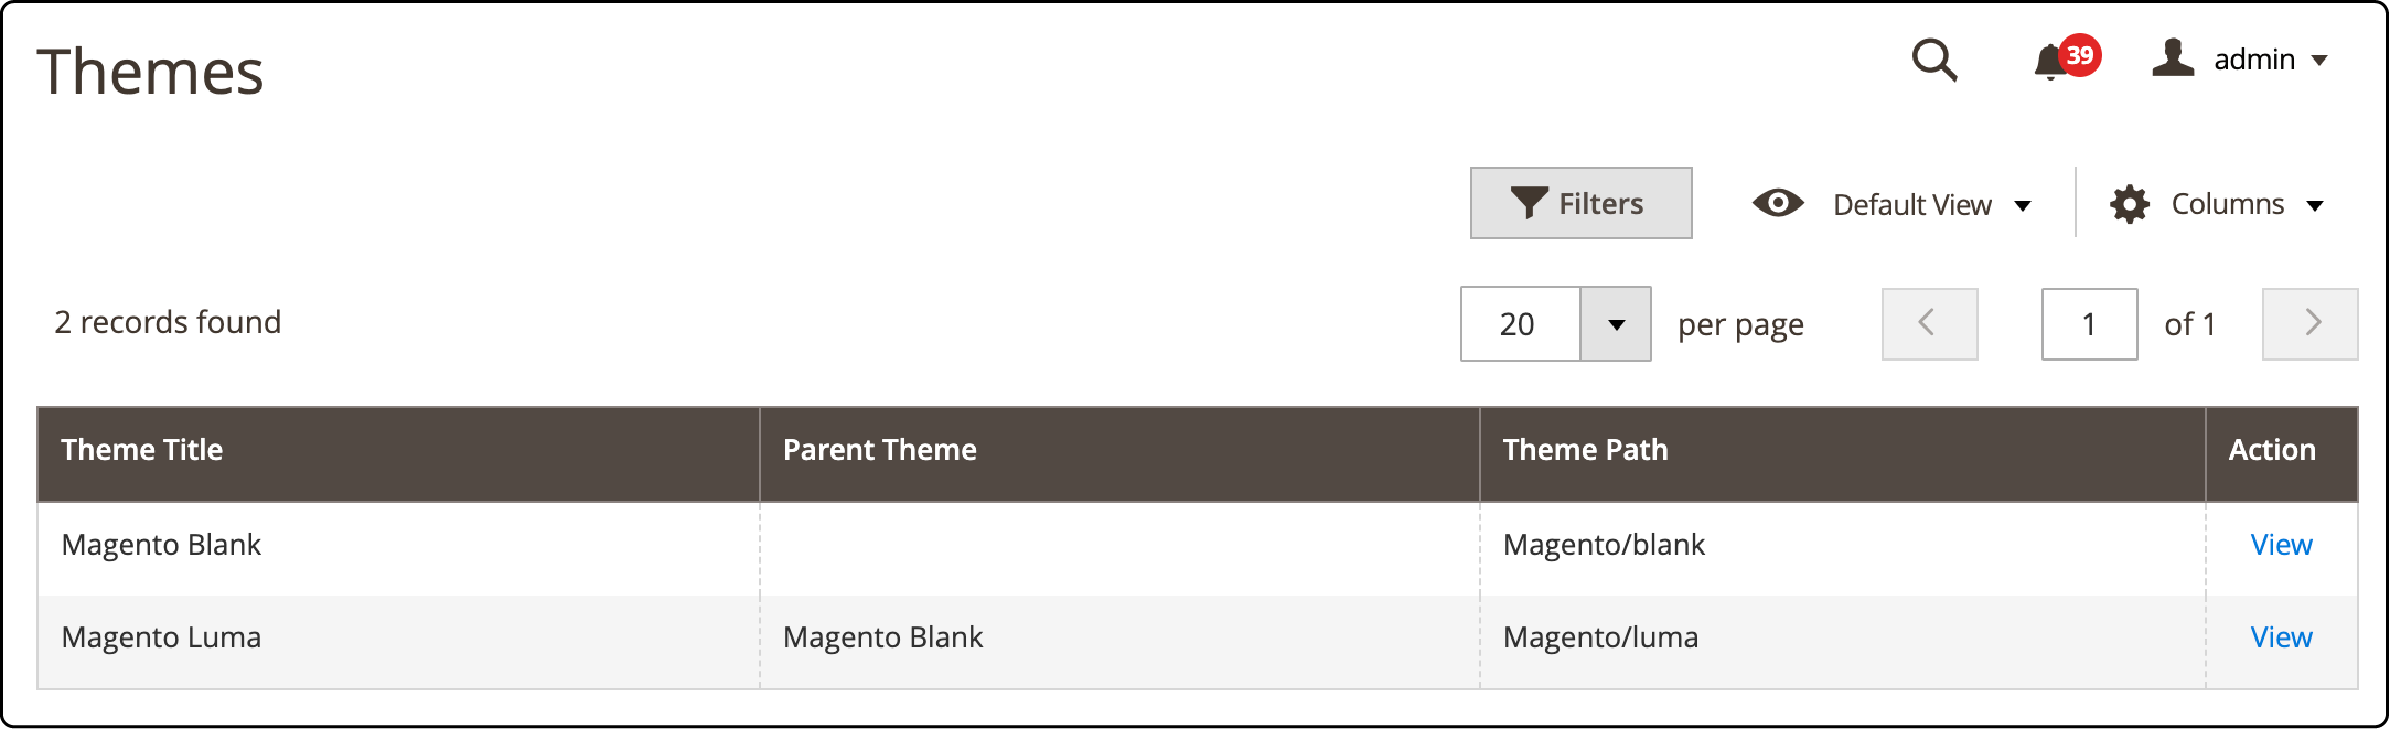 Display of available themes in Magento 2 Admin Panel for user selection